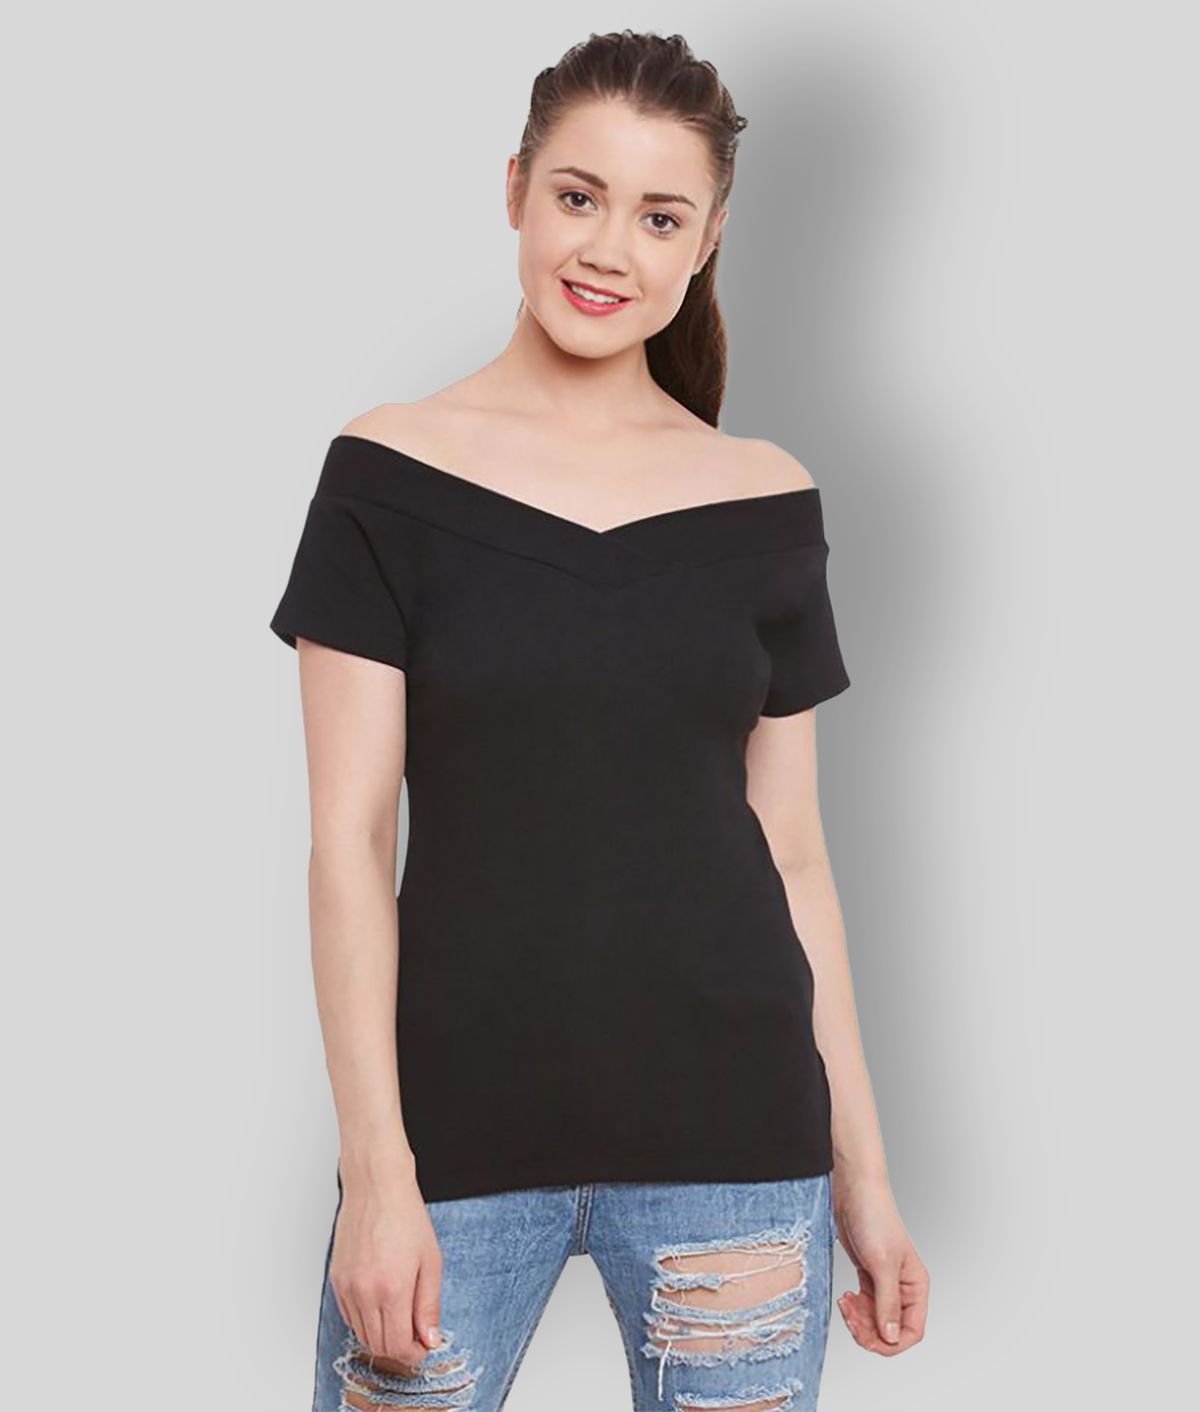     			Miss Chase - Black Cotton Women's Regular Top ( Pack of 1 )